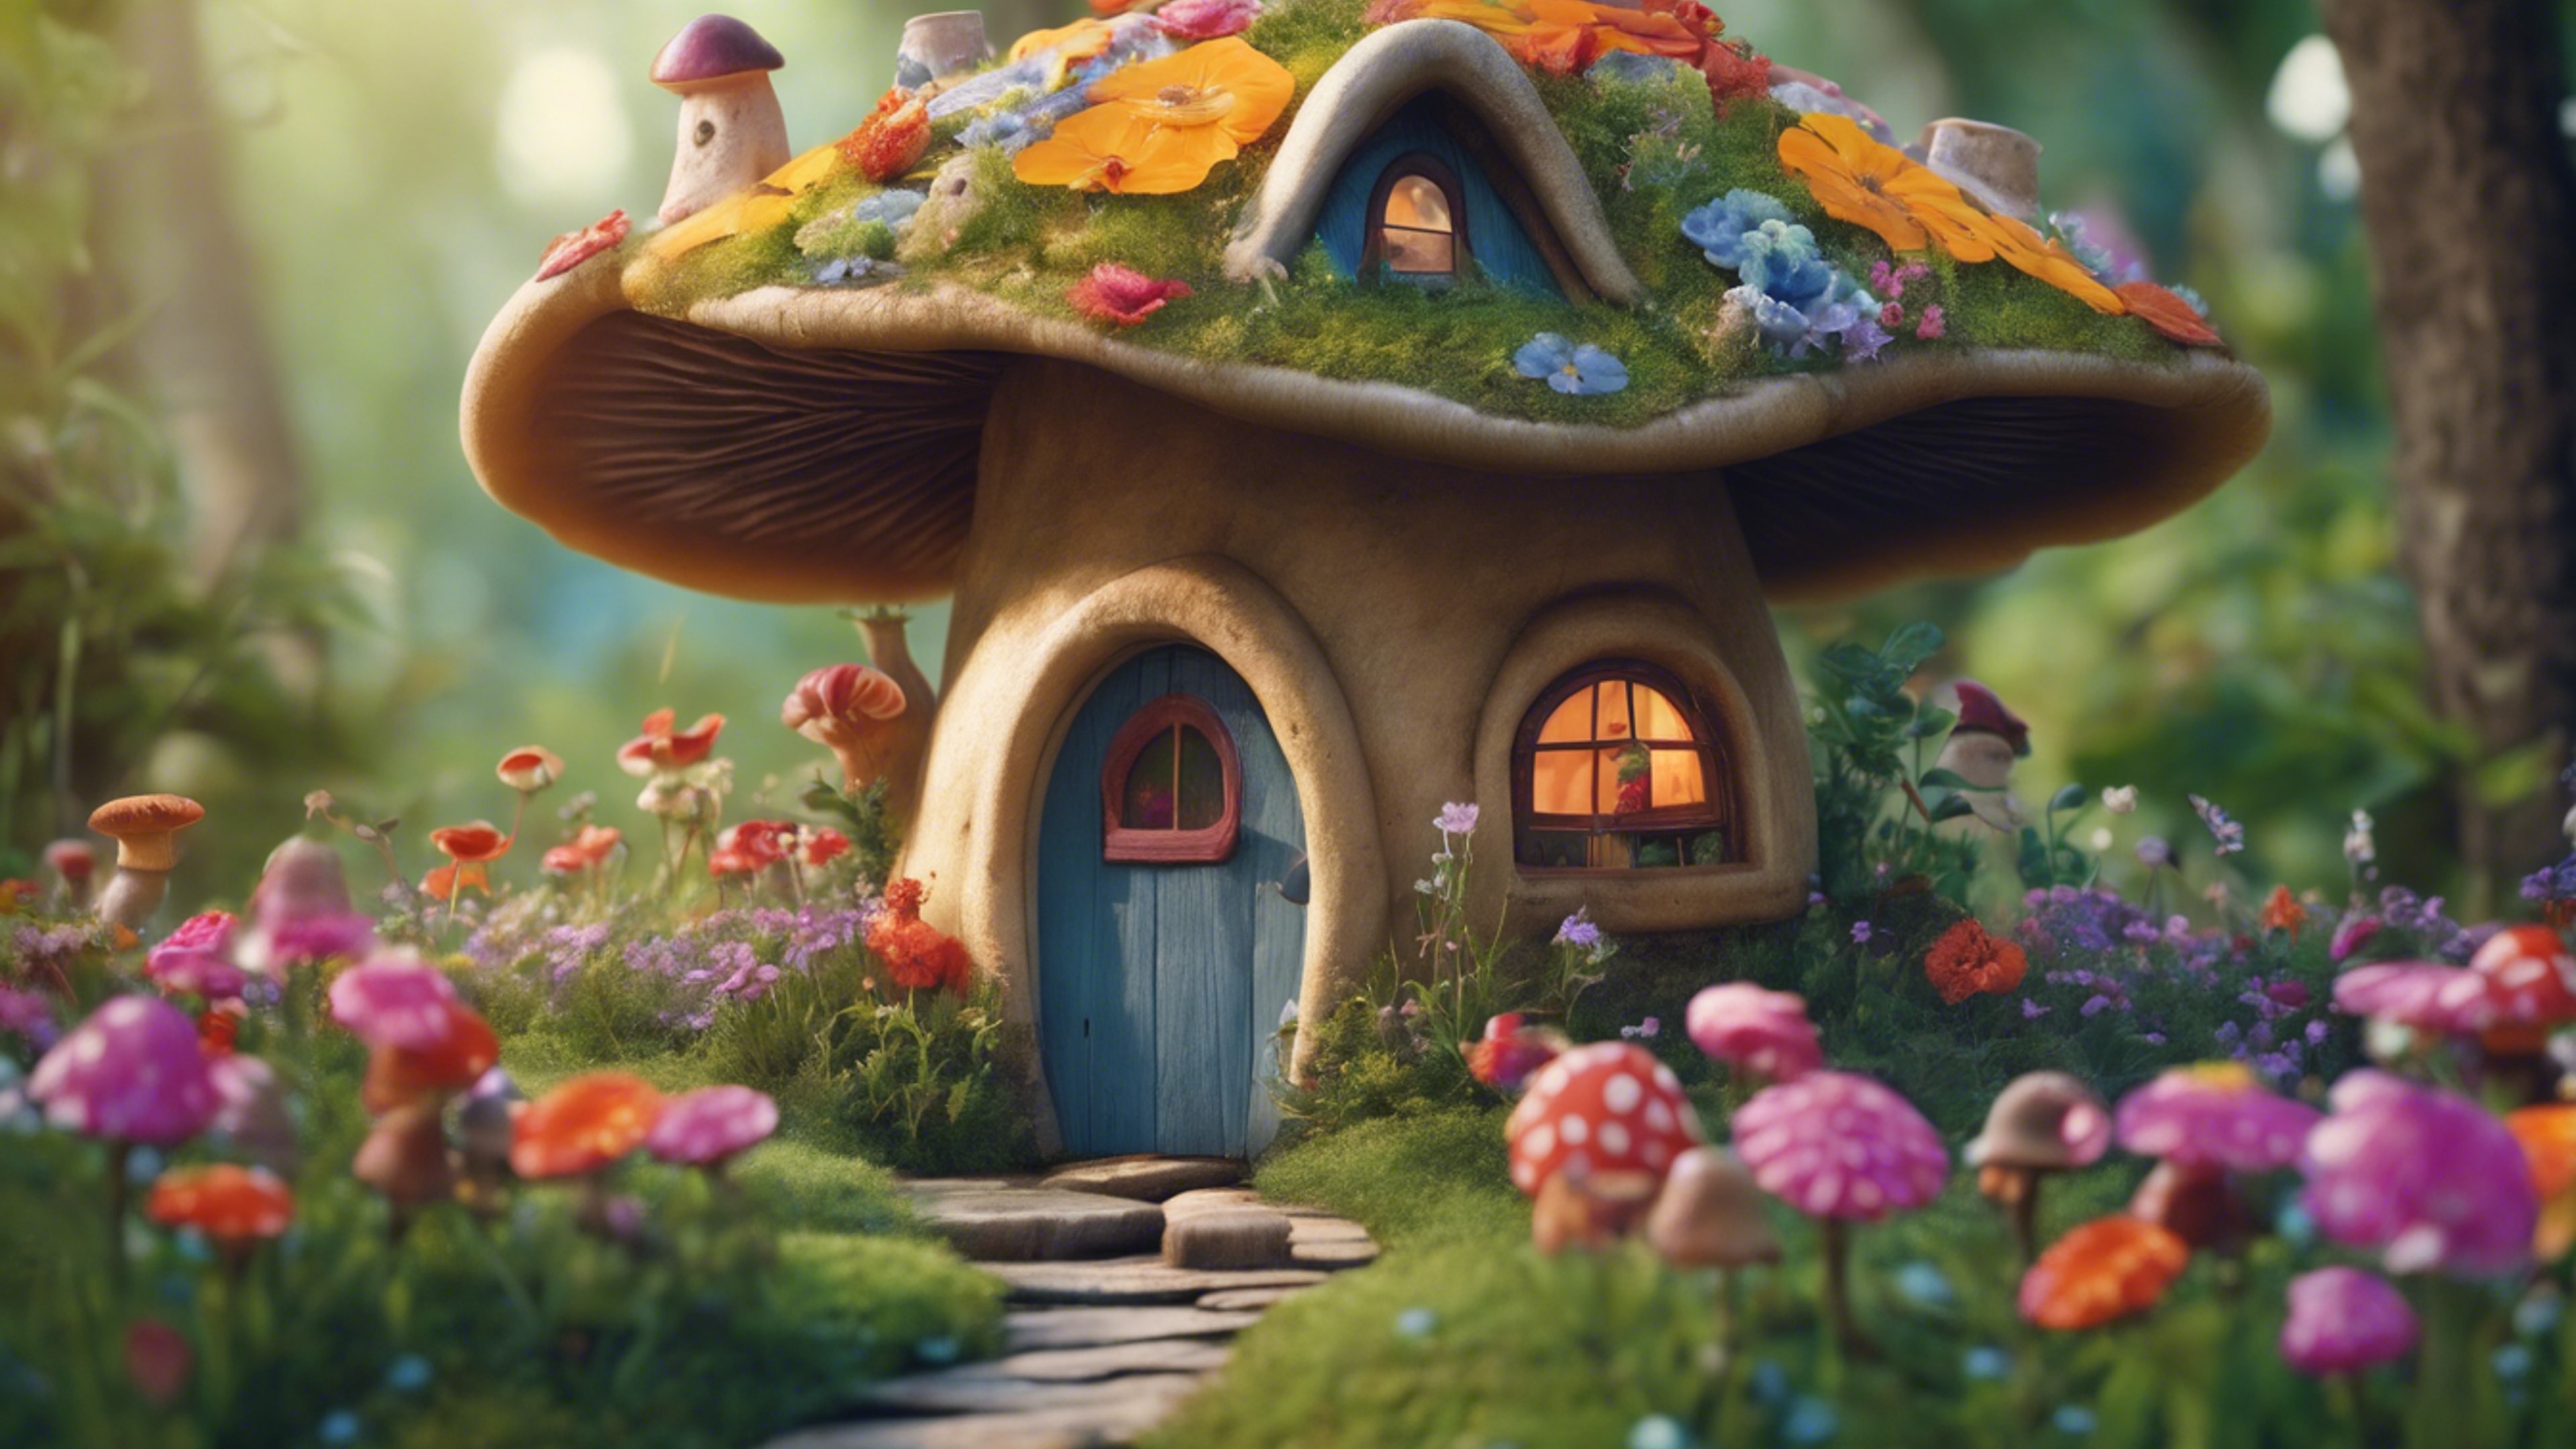 An old-fashioned, whimsical mushroom house, straight out of a children's storybook, nestled amid colorful flowers at the end of a winding path. duvar kağıdı[bbbff29f860842789321]